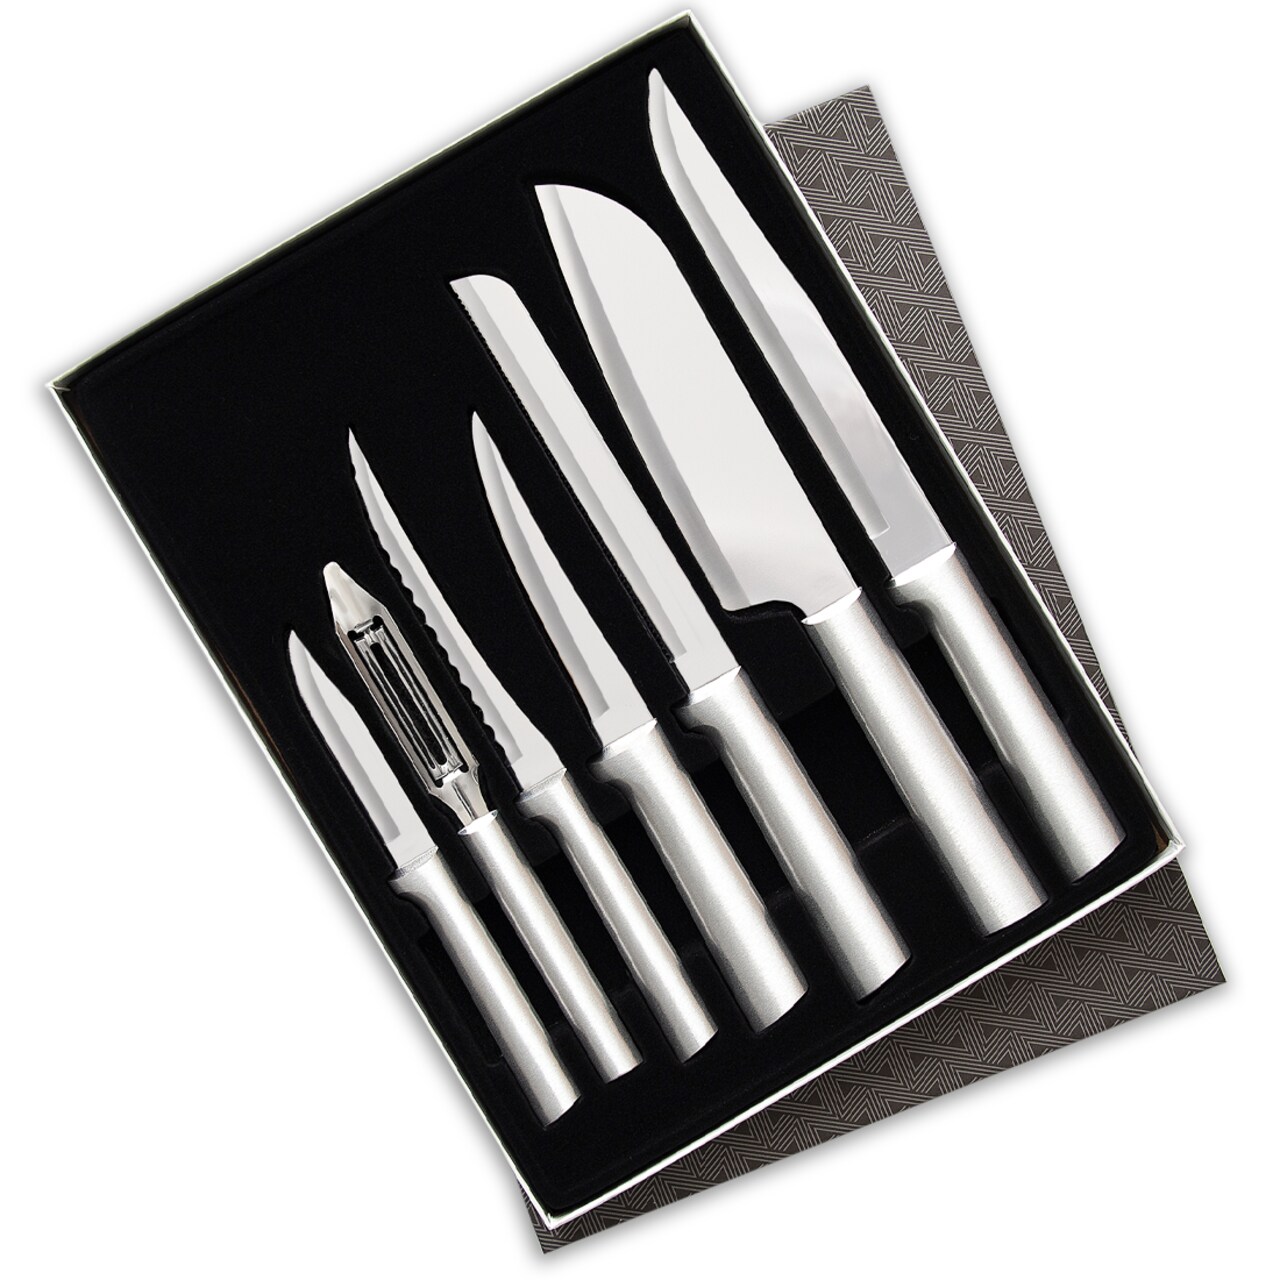 Rada Kitchen Knives Boxed Set, Ultimate Stainless Steel Cutlery Gift Set  for Cooking Prep, Paring, Peeling, and Slicing